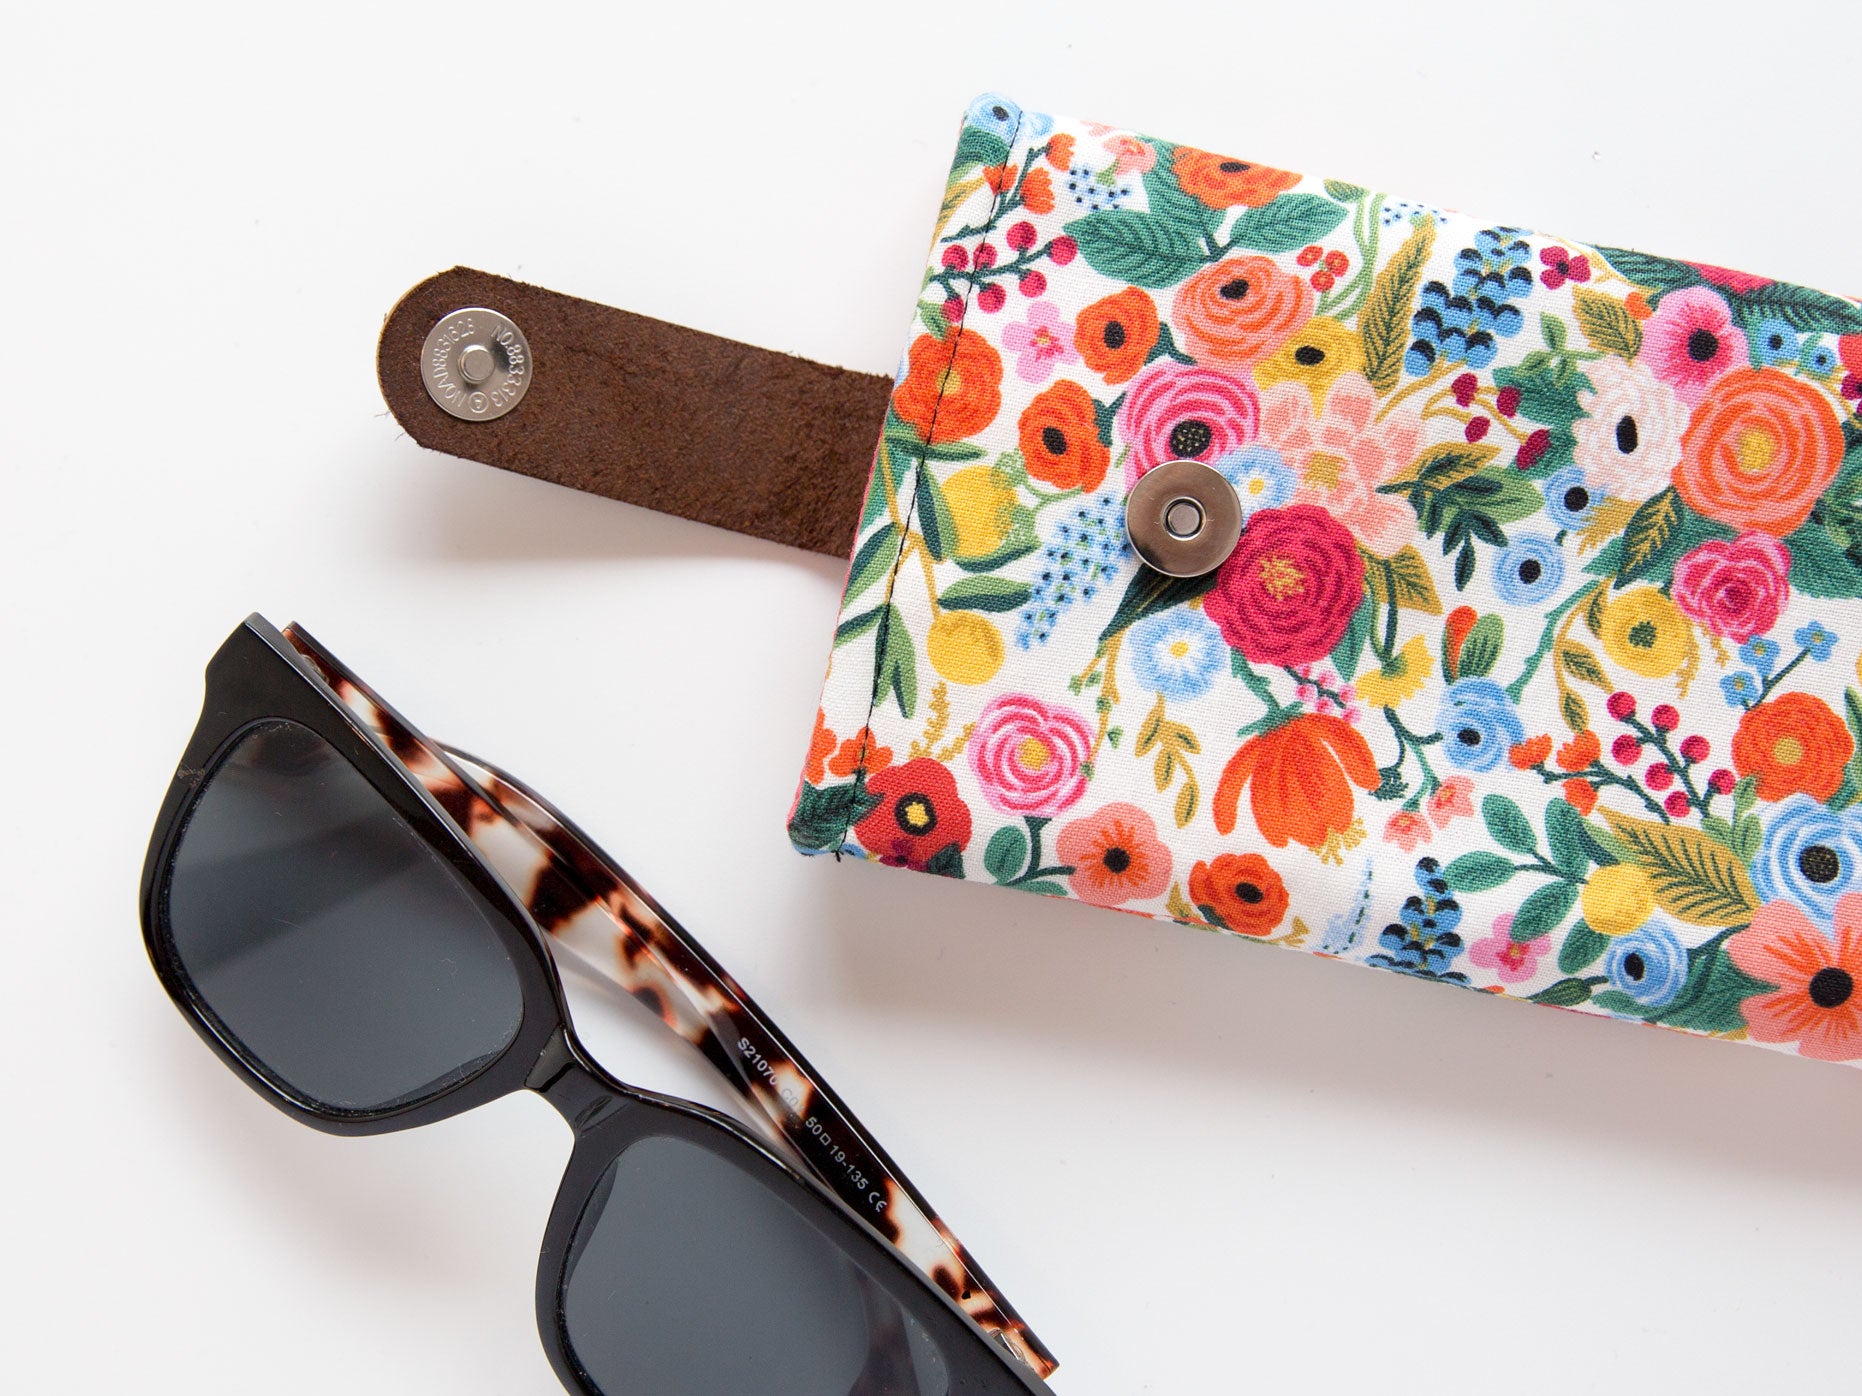 Sunglasses beside a floral glasses case with a magnetic snap